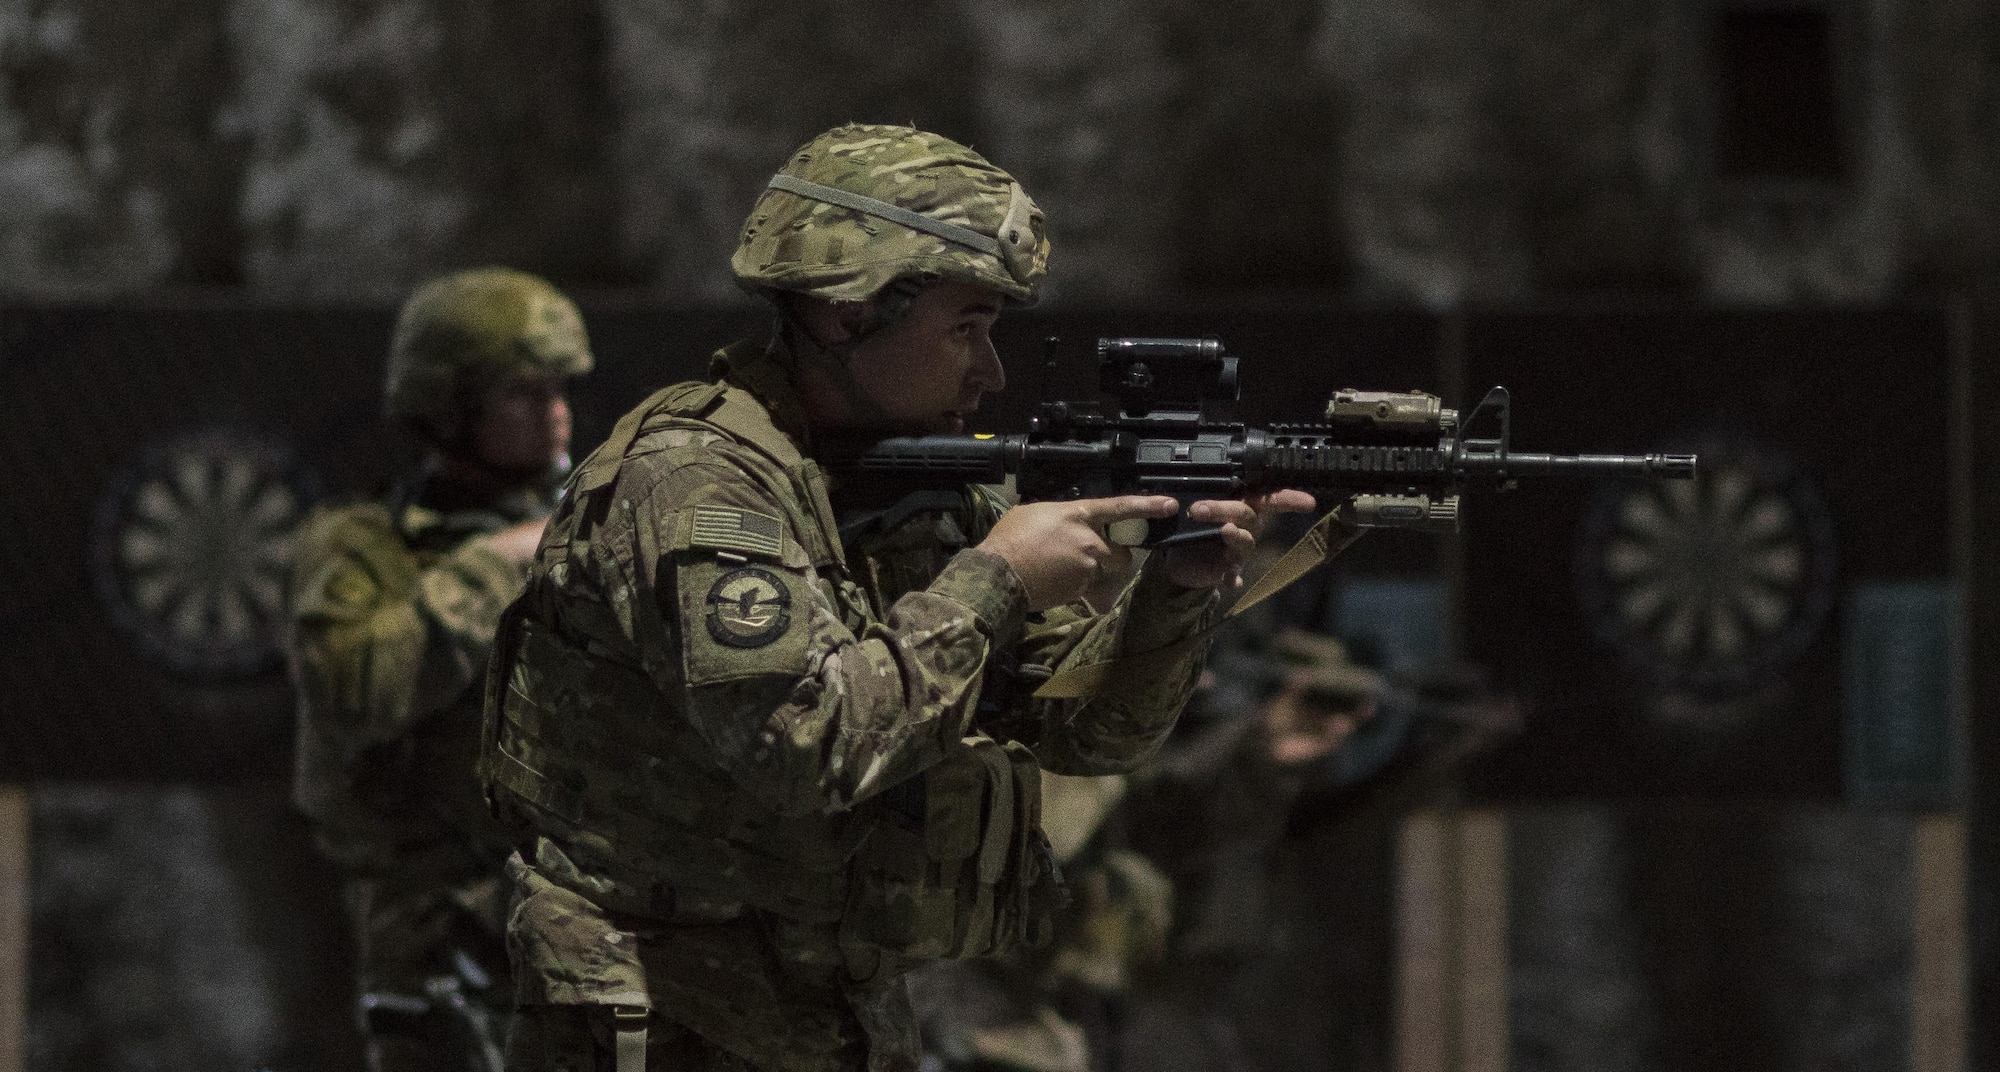 Members of the 332nd Expeditionary Security Forces Squadron clear a building during an active-shooter exercise June 8, 2017, in Southwest Asia. The purpose of the exercise was to evaluate the squadron’s ability to respond to an emergency and improve tactics in a simulated environment. (U.S. Air Force photo/Senior Airman Damon Kasberg) 